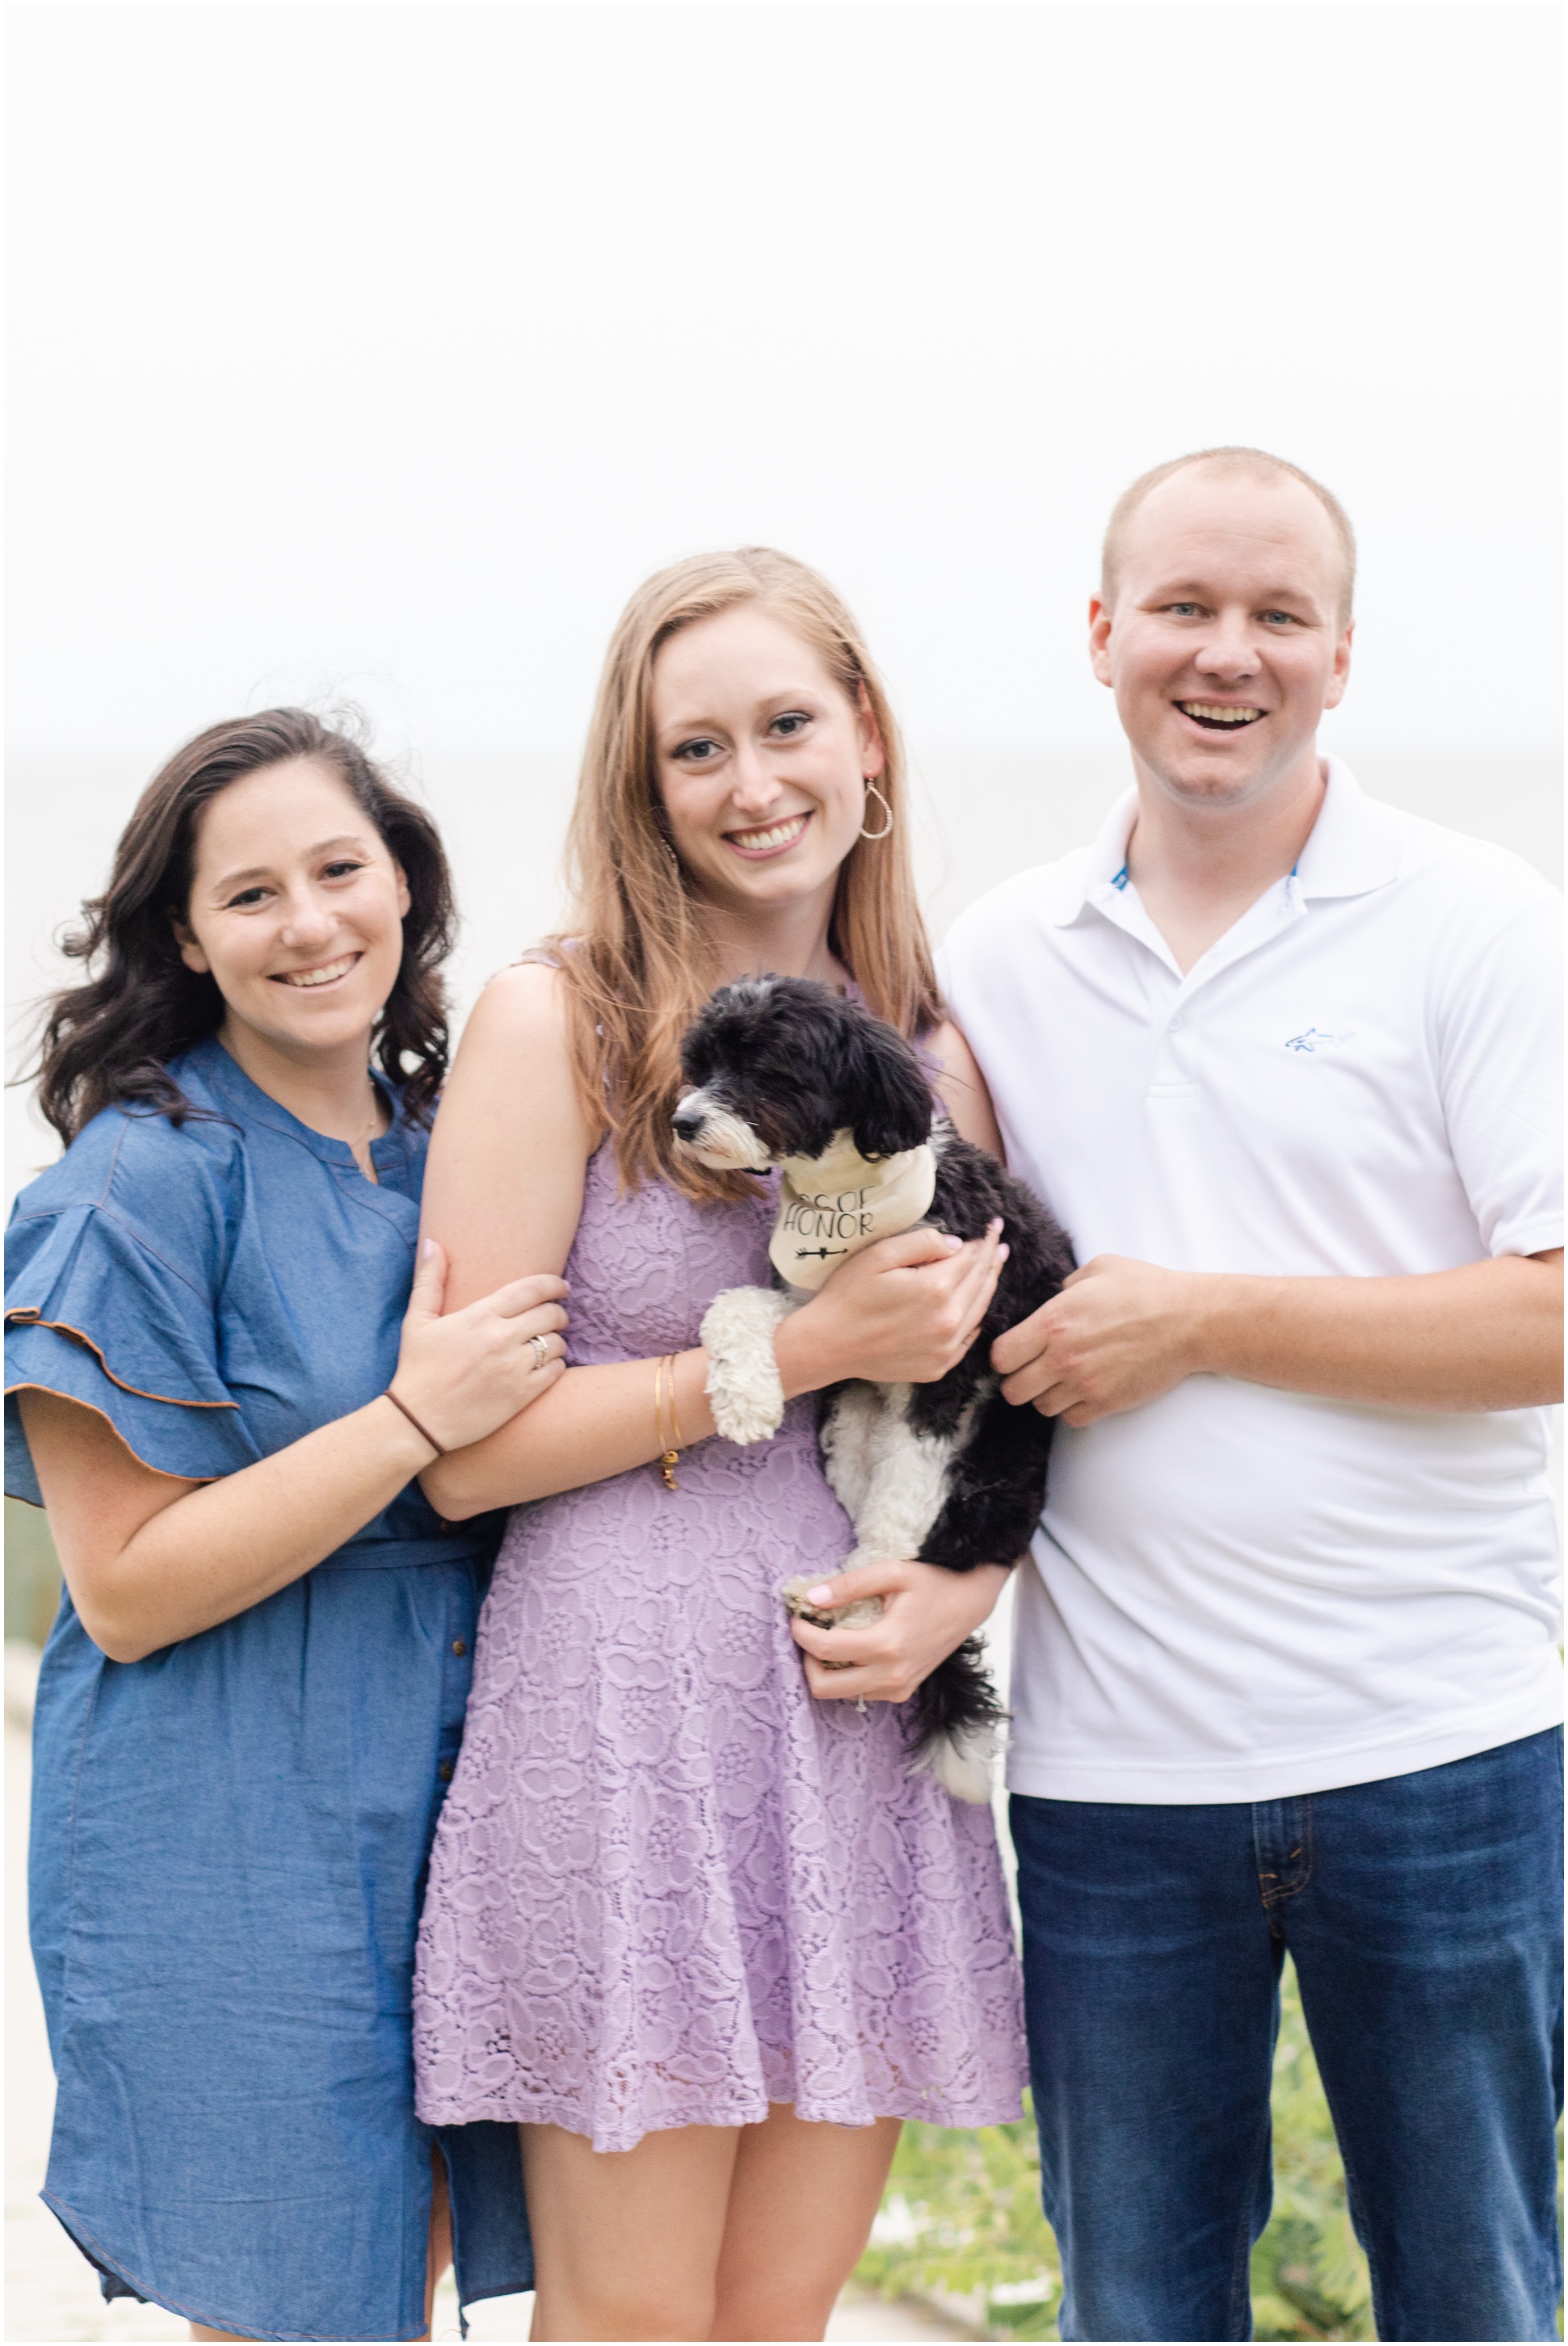 Maid of Honor, Groom, Bride, and their Puppy at their engagement session, smiling toward the camera